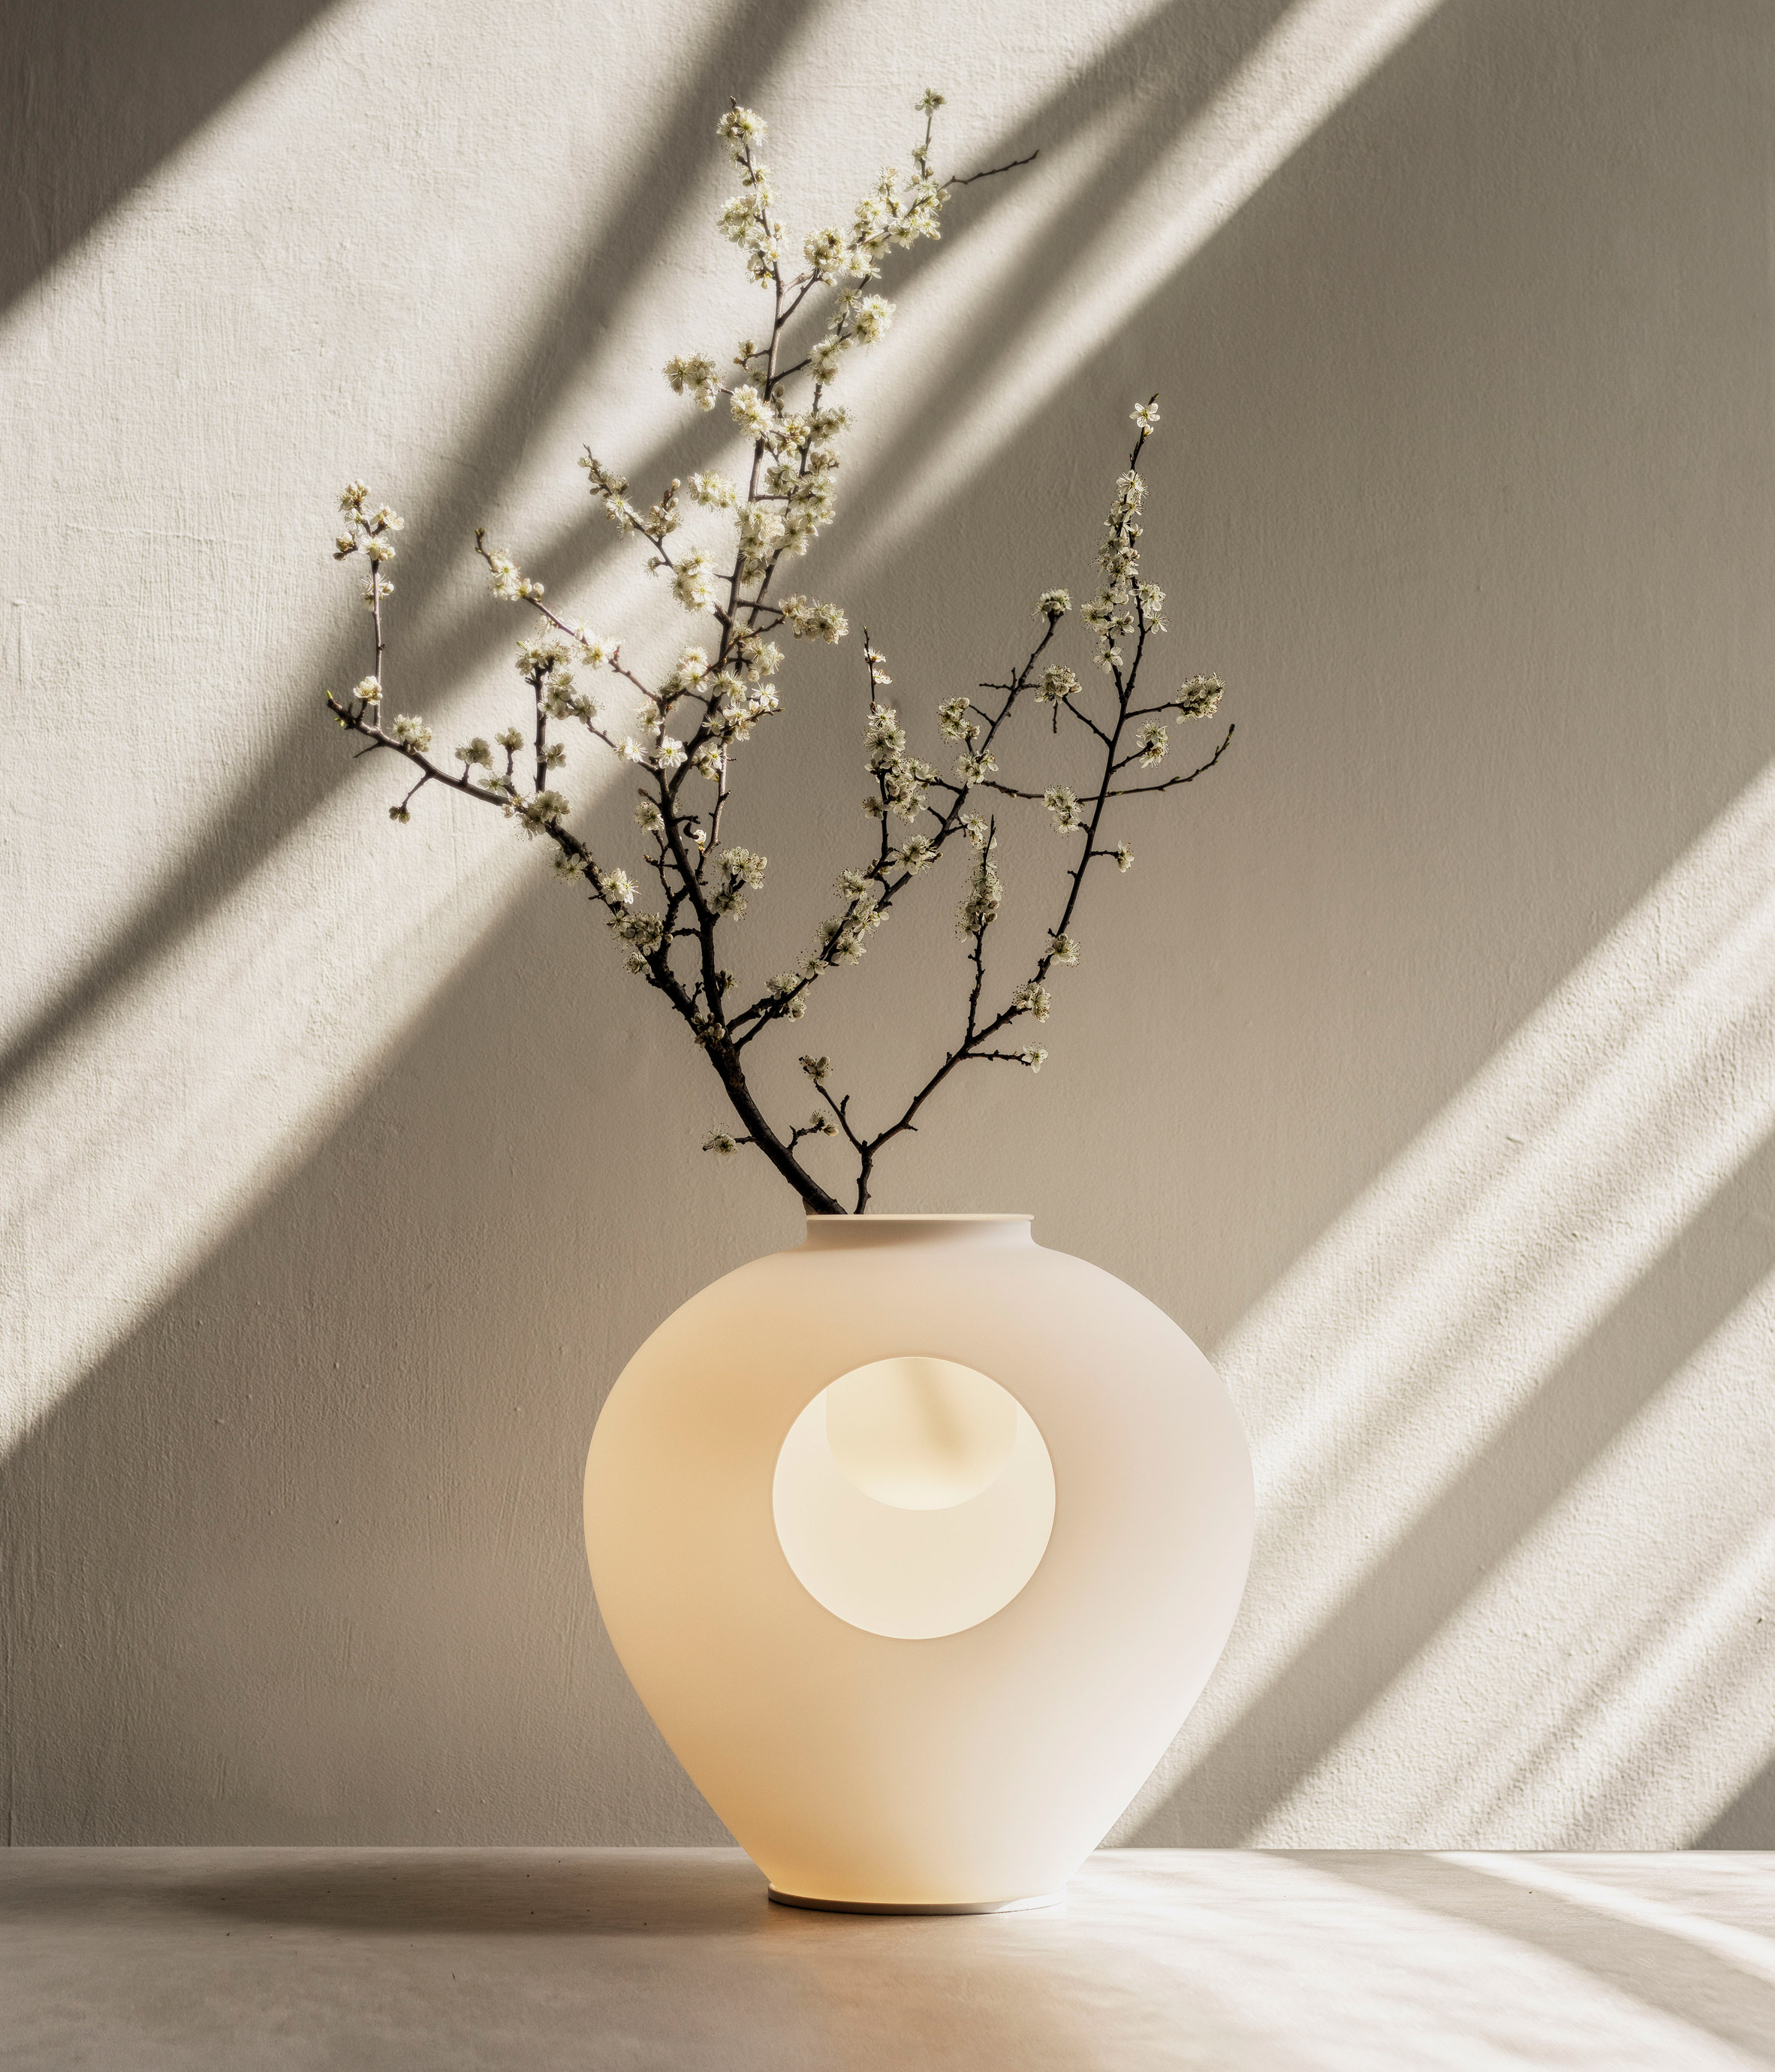 Madre by Andre Anastasio for Foscarini